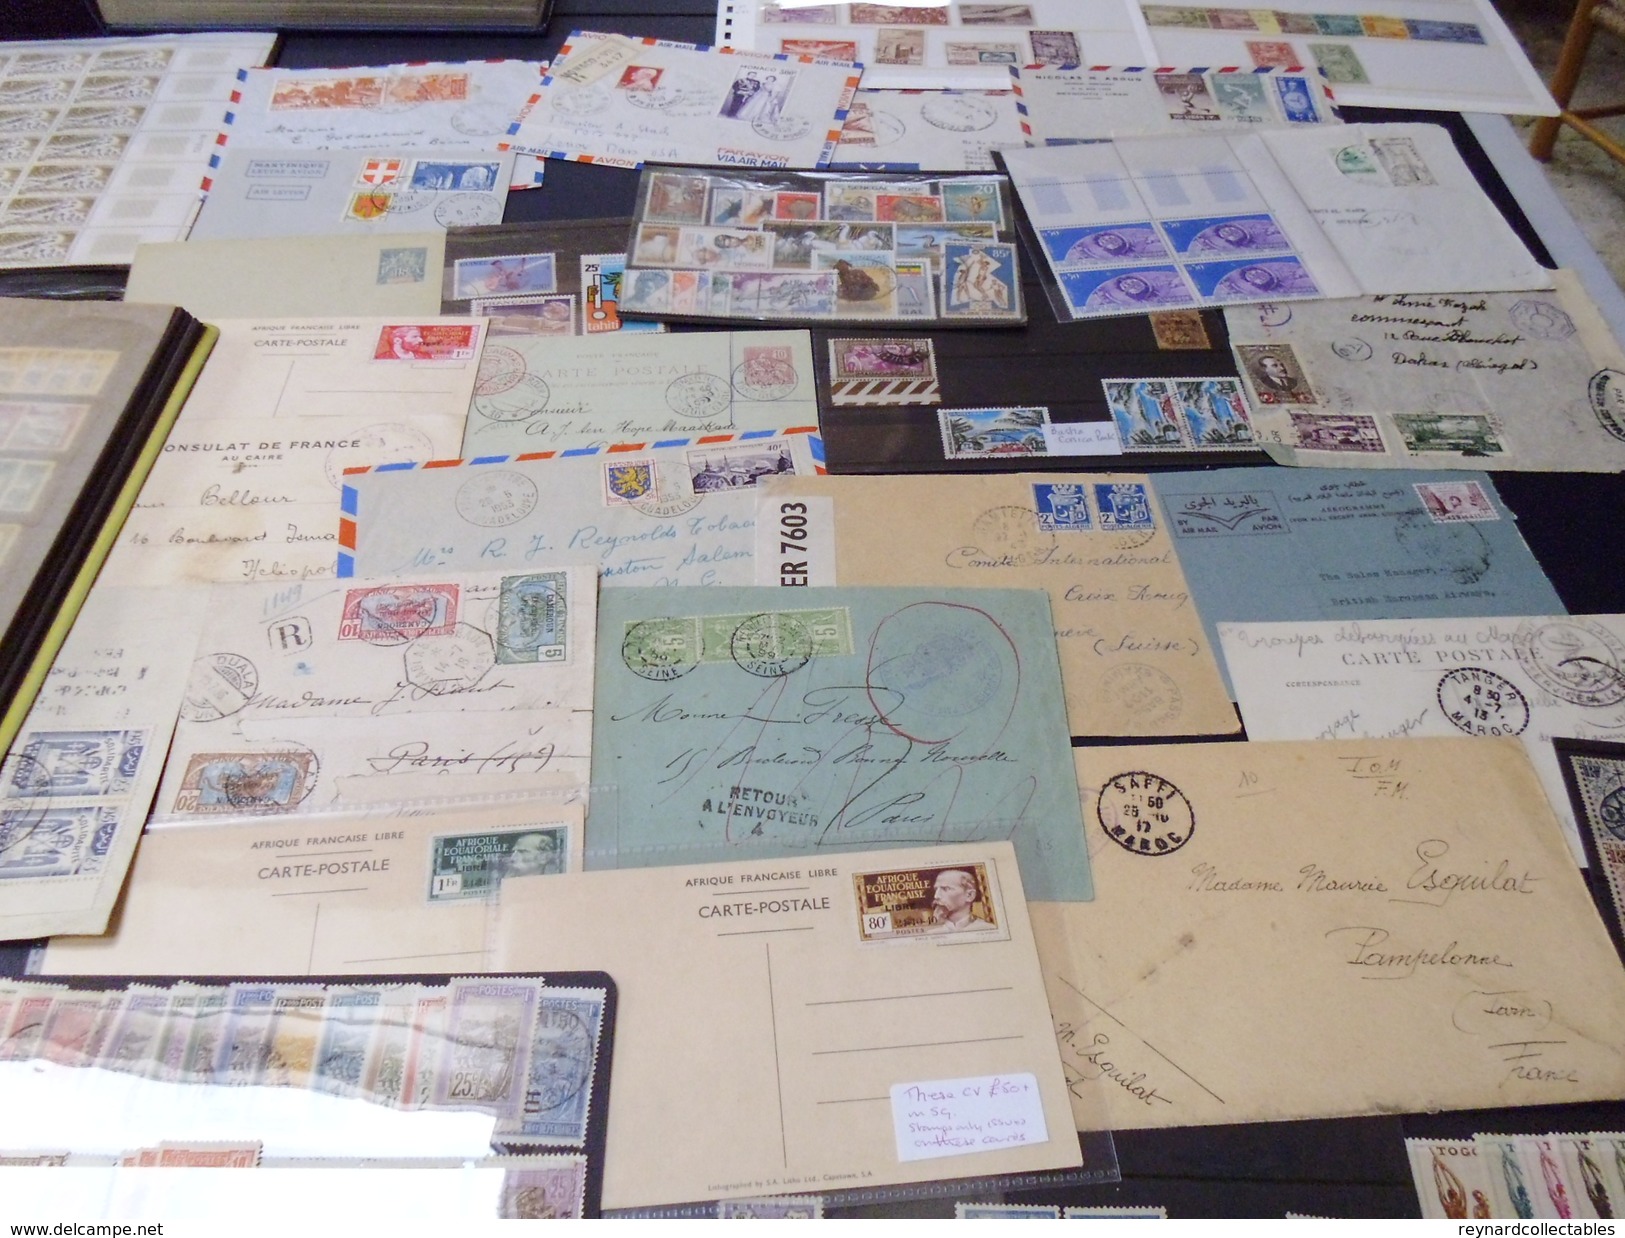 Superb France Colonies lot (1000s). Pre/post Indep. nhm/vfu, sheets,airs,covers/cards 19th-20thC. Huge lot!